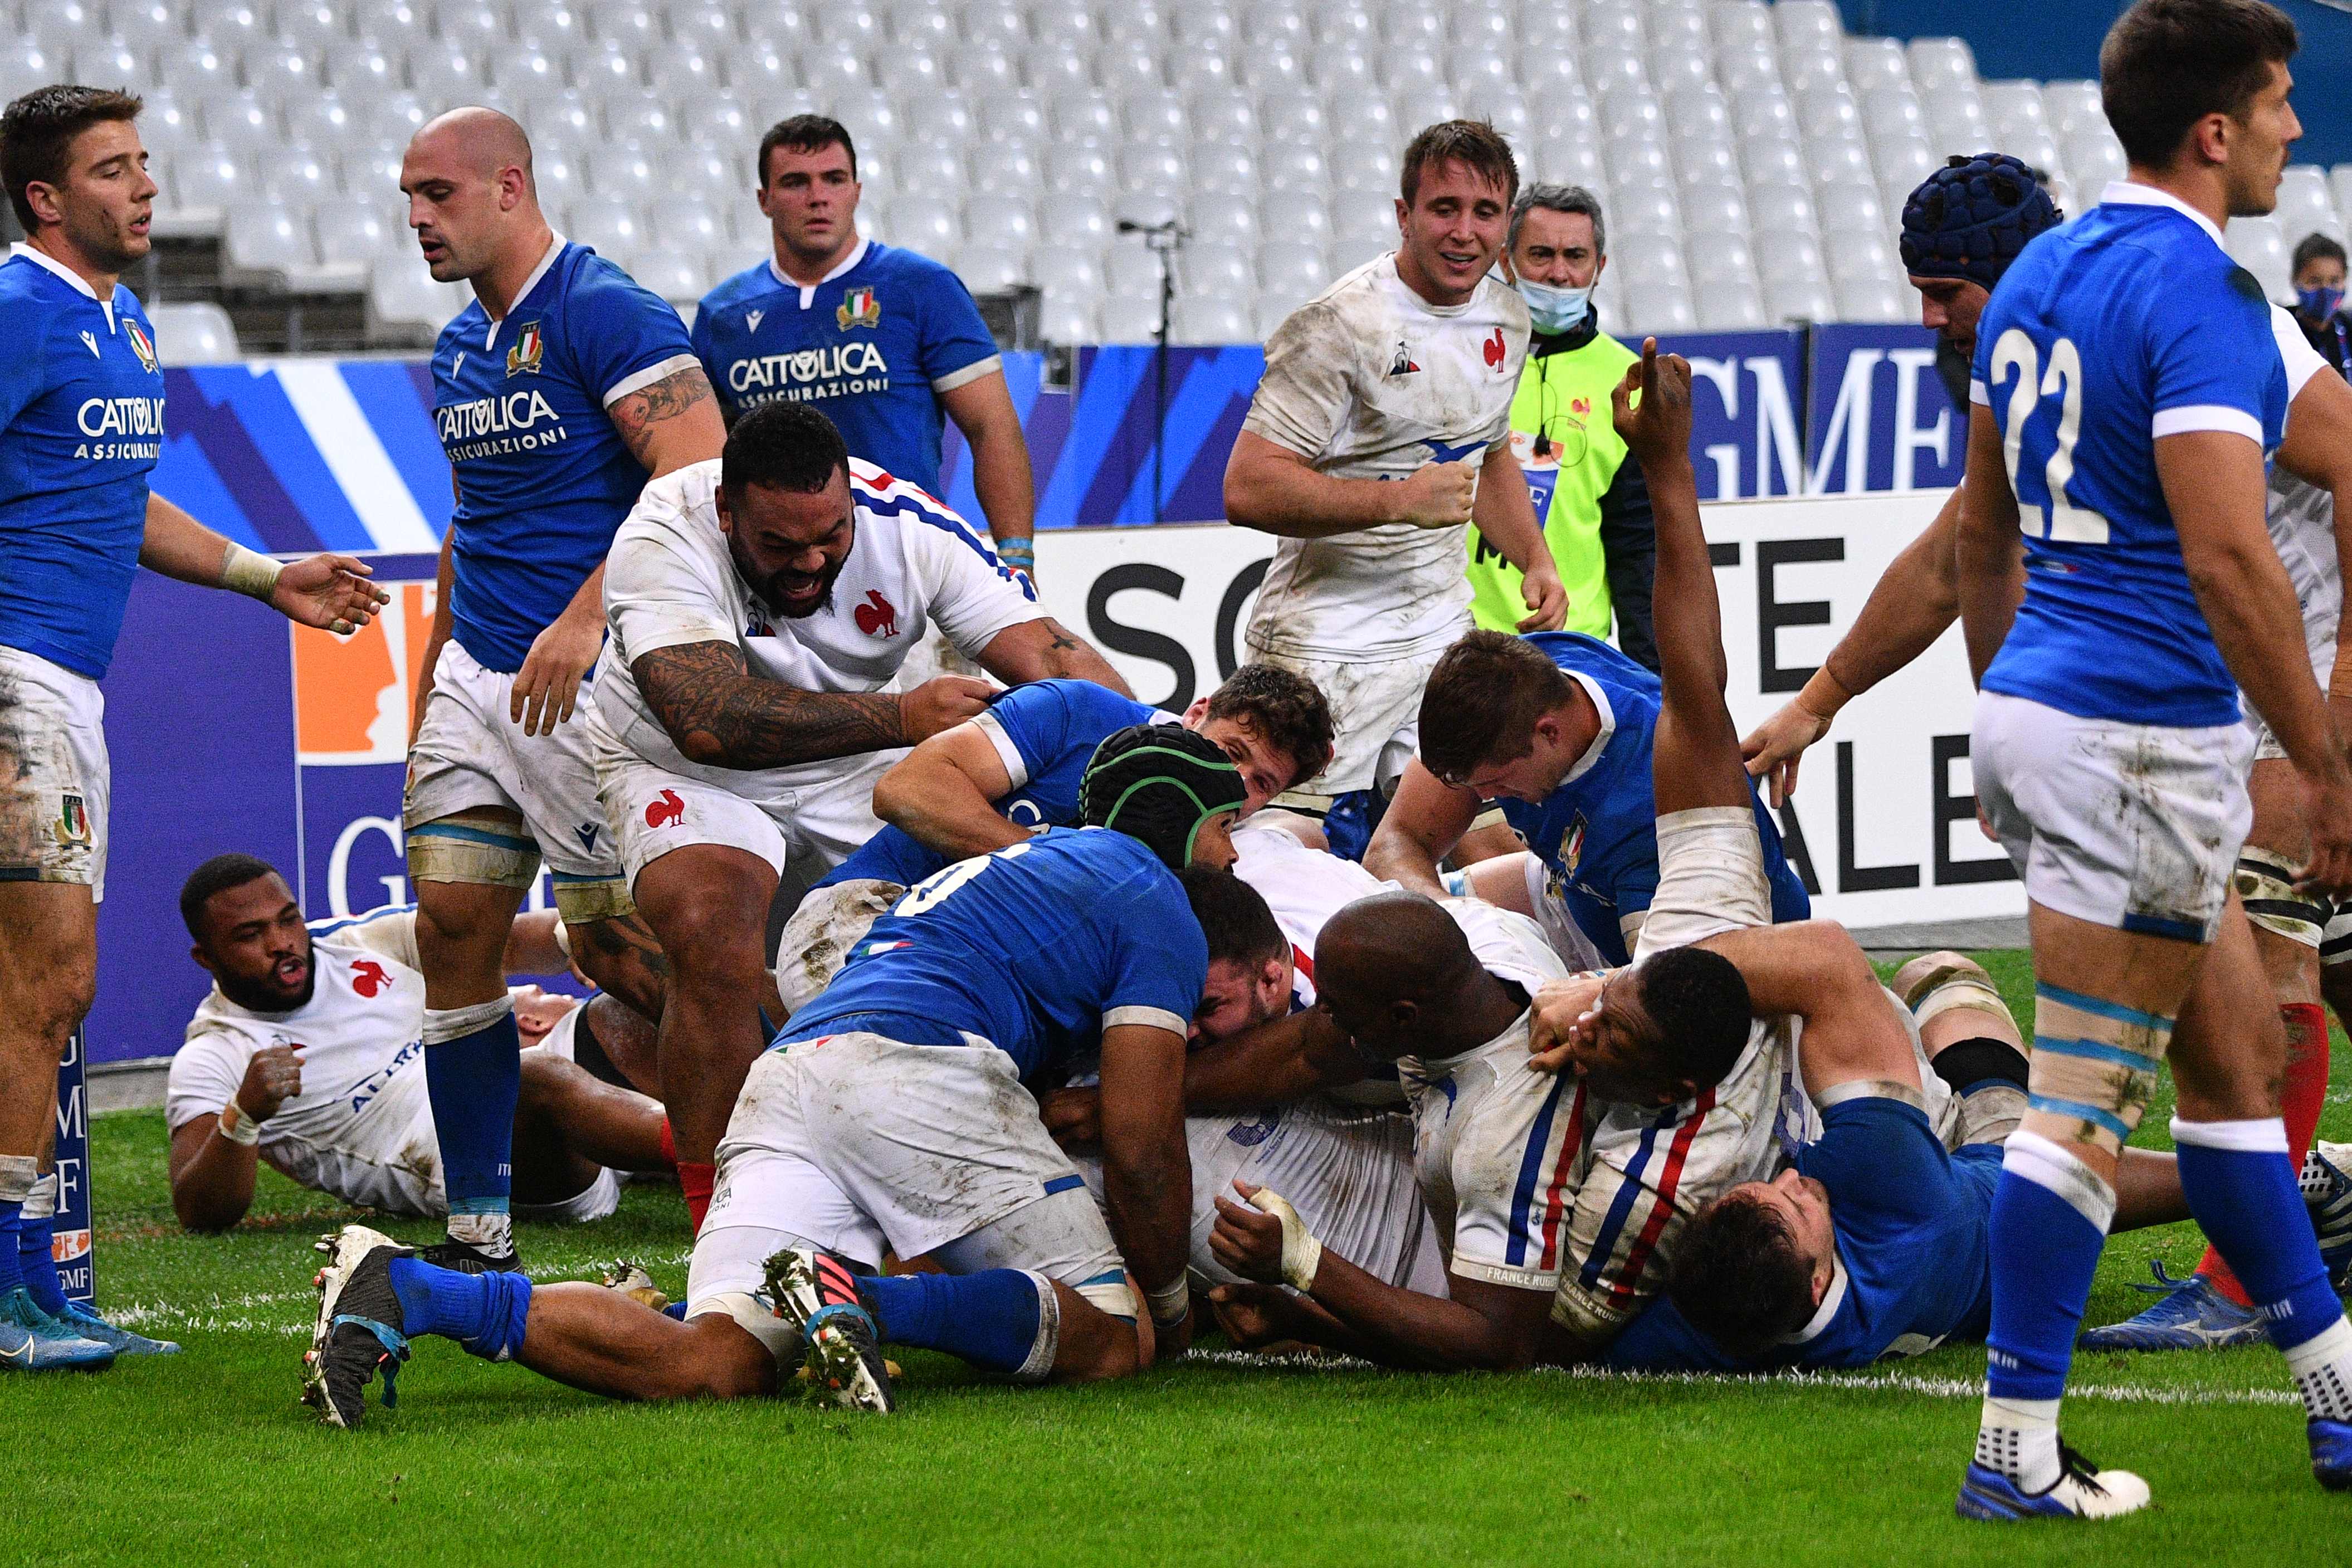 A French second-string beat Italy 36-5 on Saturday night